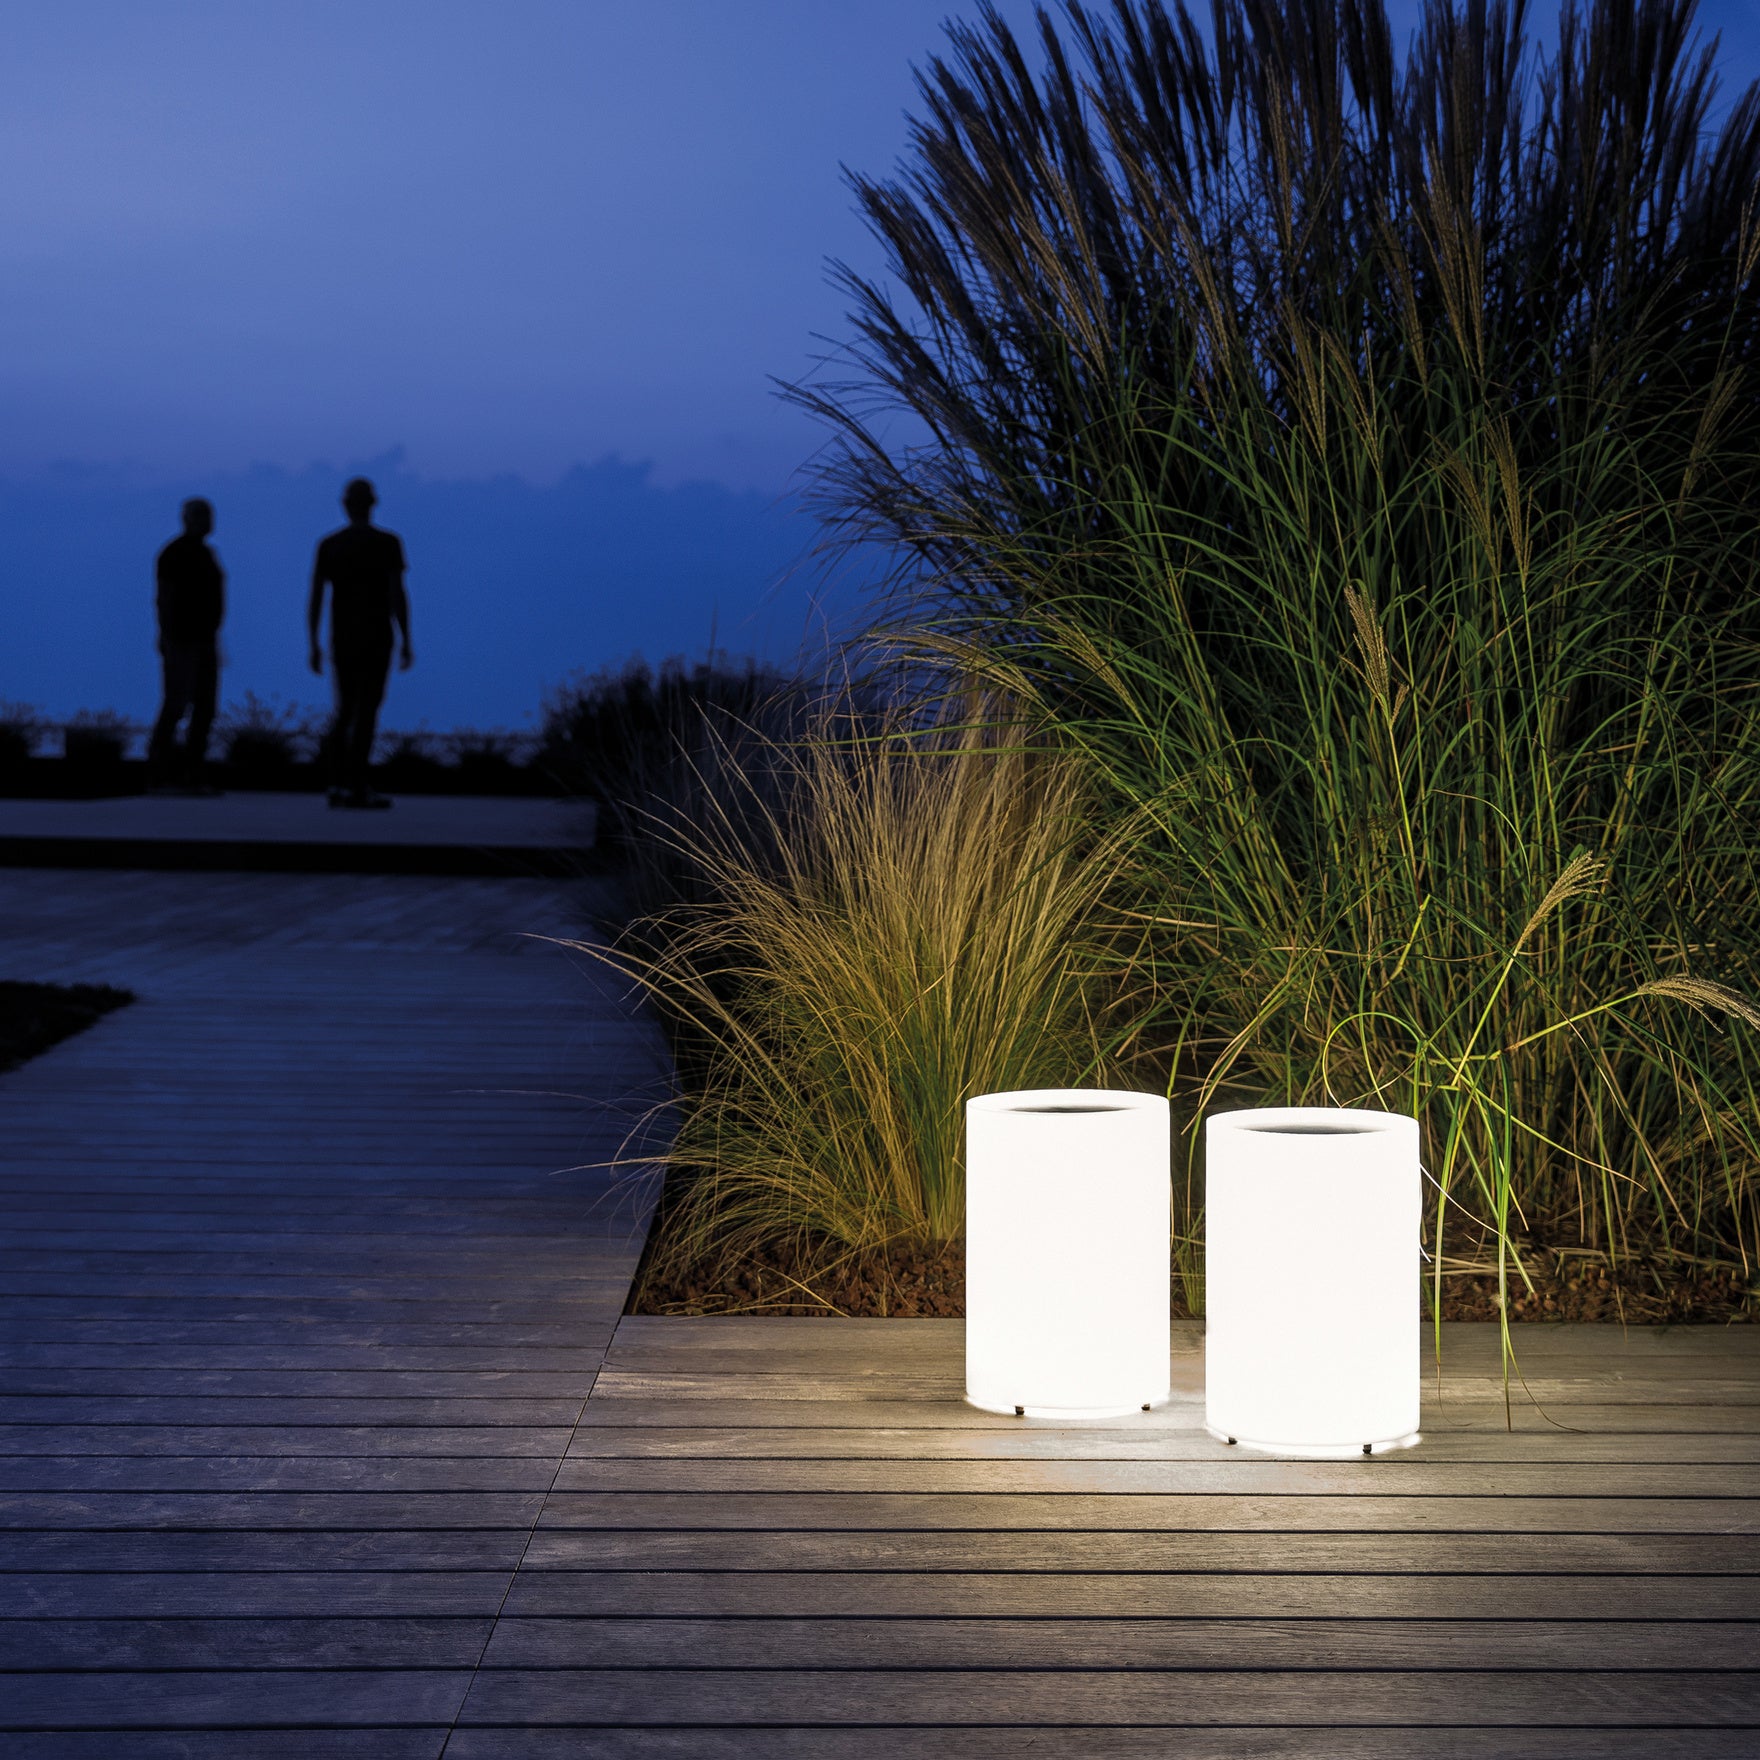 Lighting featured against timber decking and tall grasses